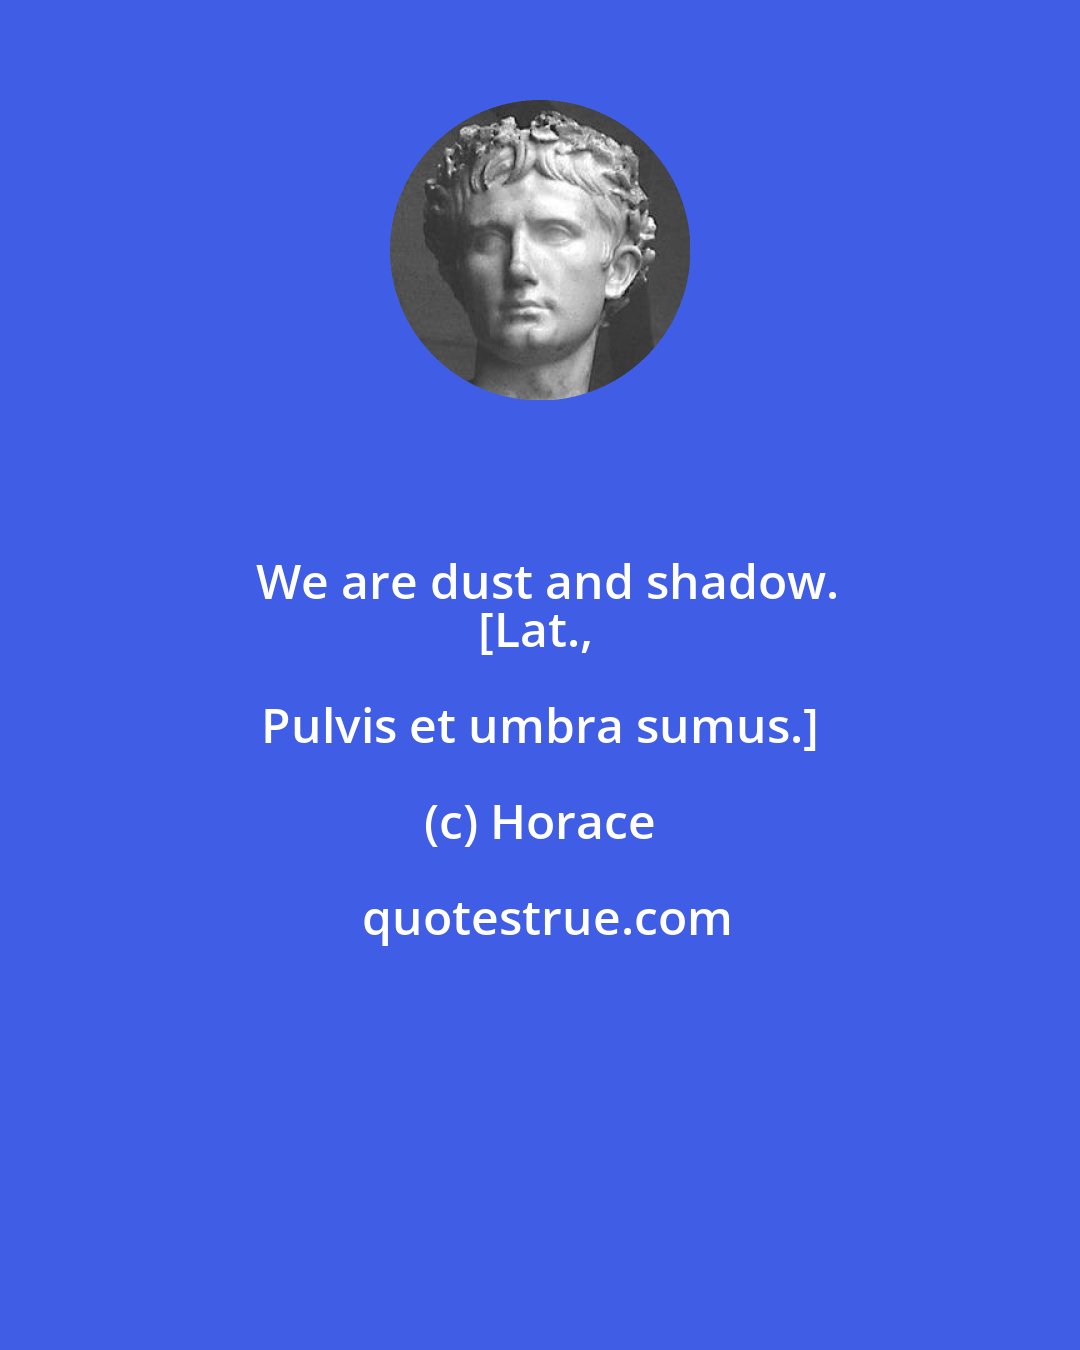 Horace: We are dust and shadow.
[Lat., Pulvis et umbra sumus.]